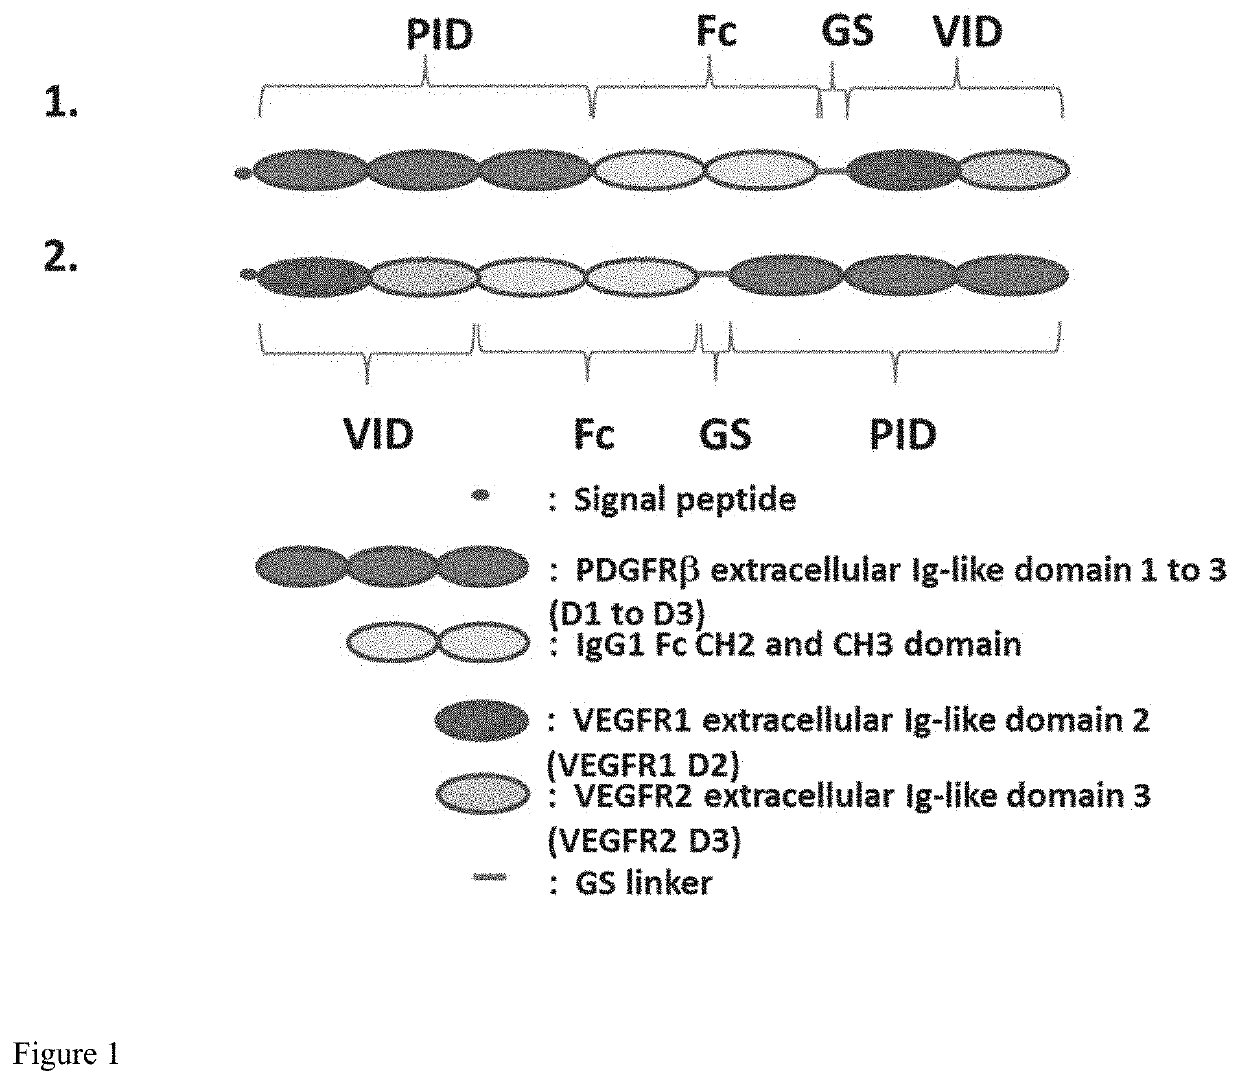 Fusion protein comprising a ligand binding domain of VEGF and PDGF